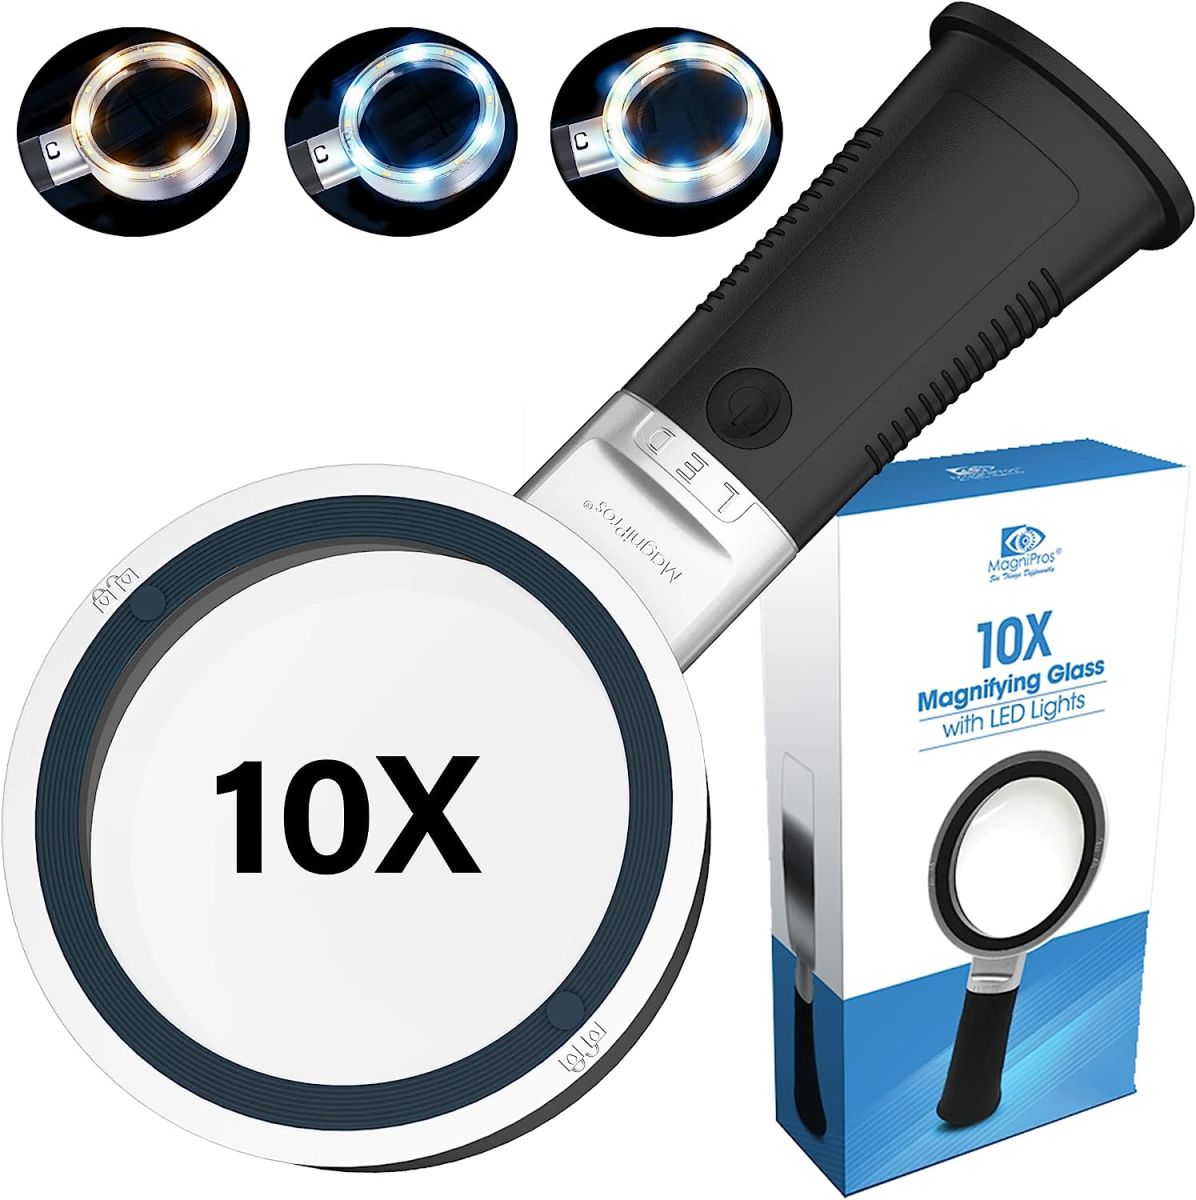 MagniPros Extra Large 10X Magnifying Glass with Detachable Lenses- 3 Light Modes Reading Magnifier with Self-Standing Handle for Hobbyists, AMD, Reading Fine Print, Seniors, Inspection, Coin, Jewelry